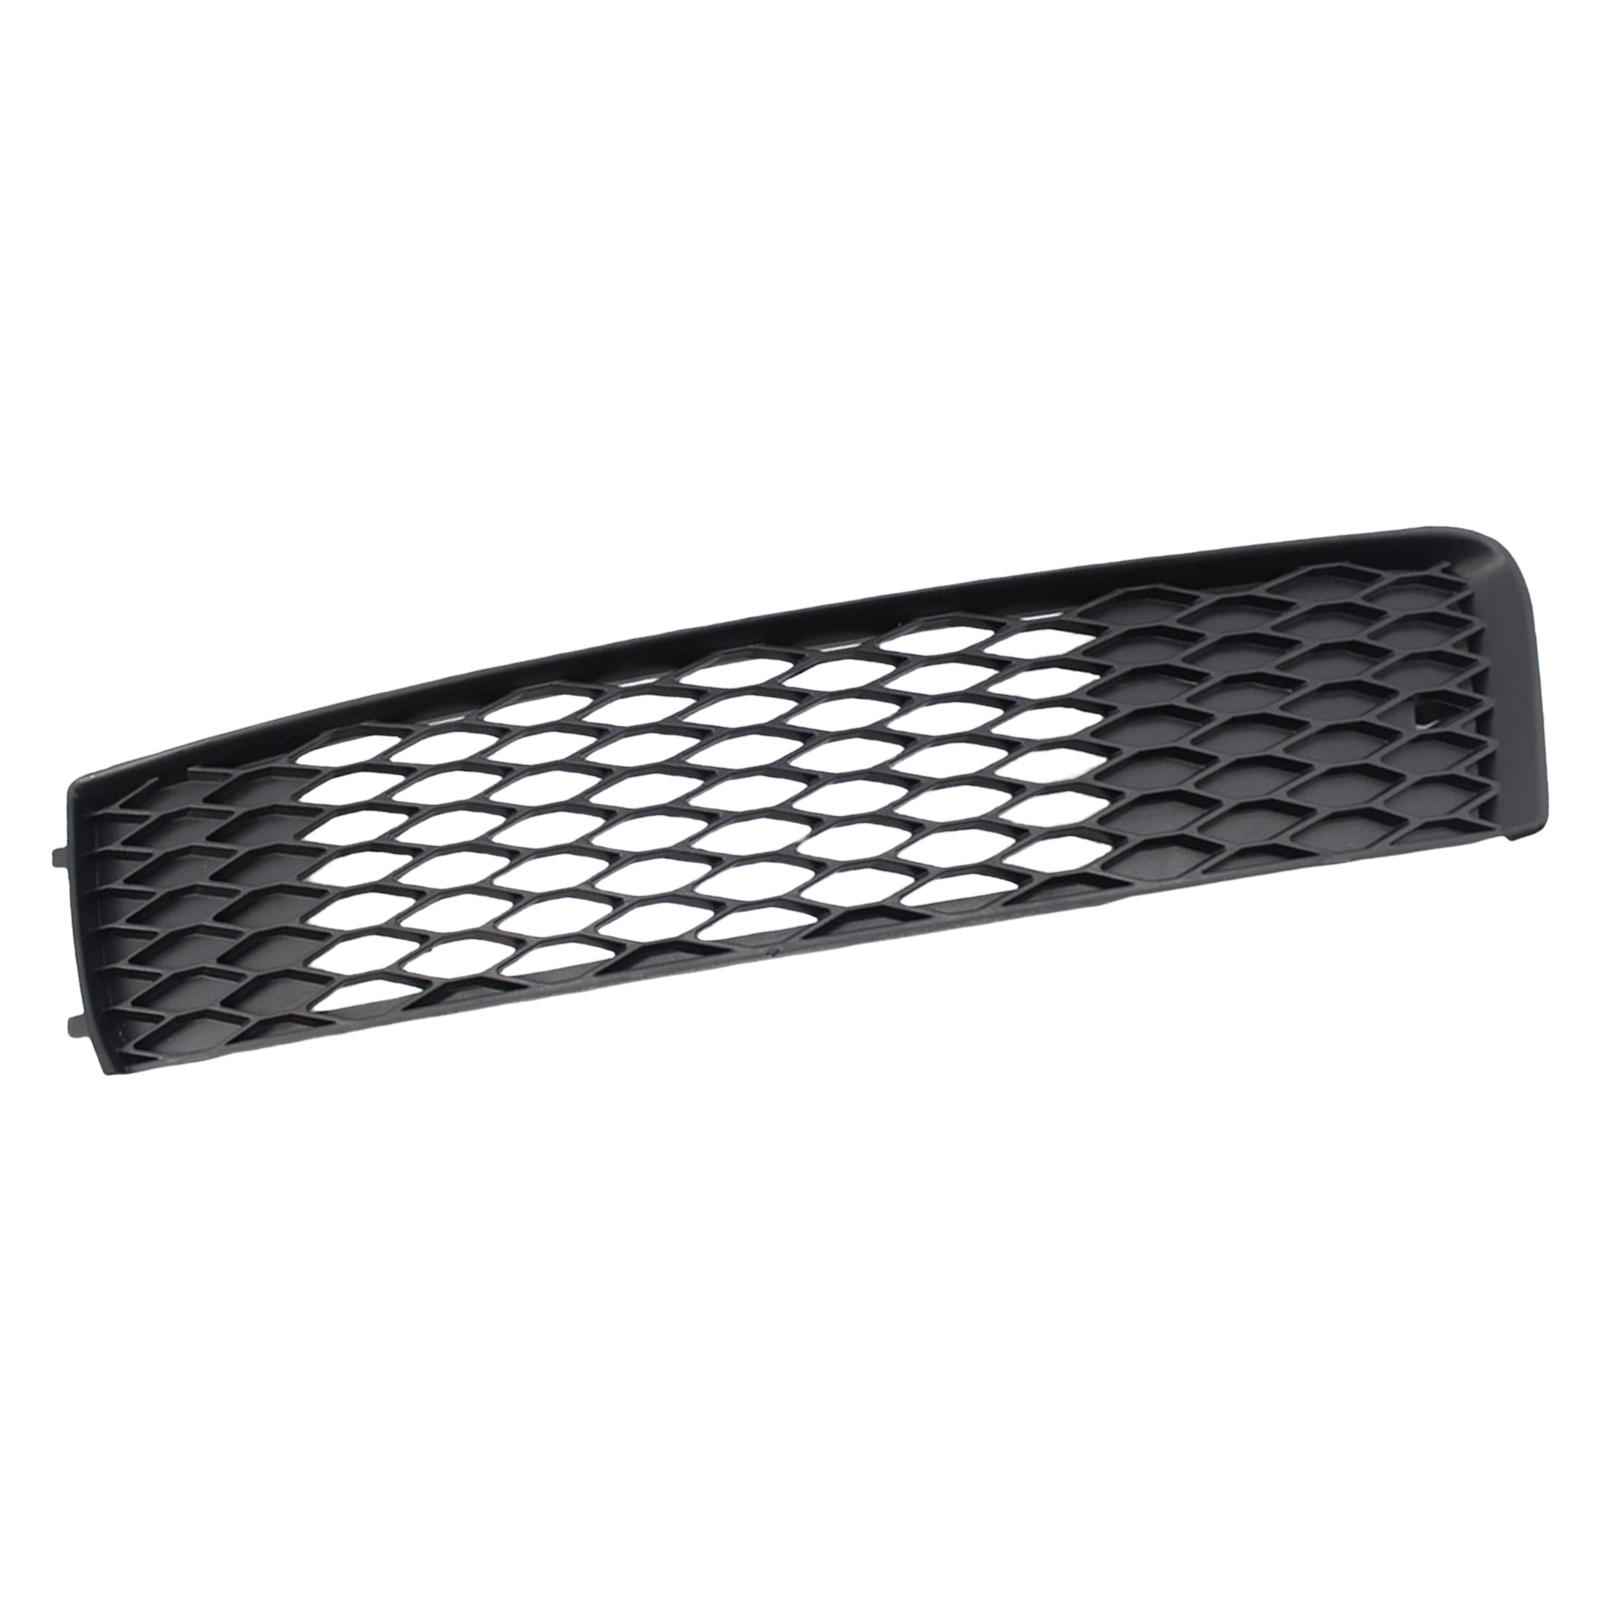 Front Bumper Grille Cover for Q7 2010-2015 Accessory Car